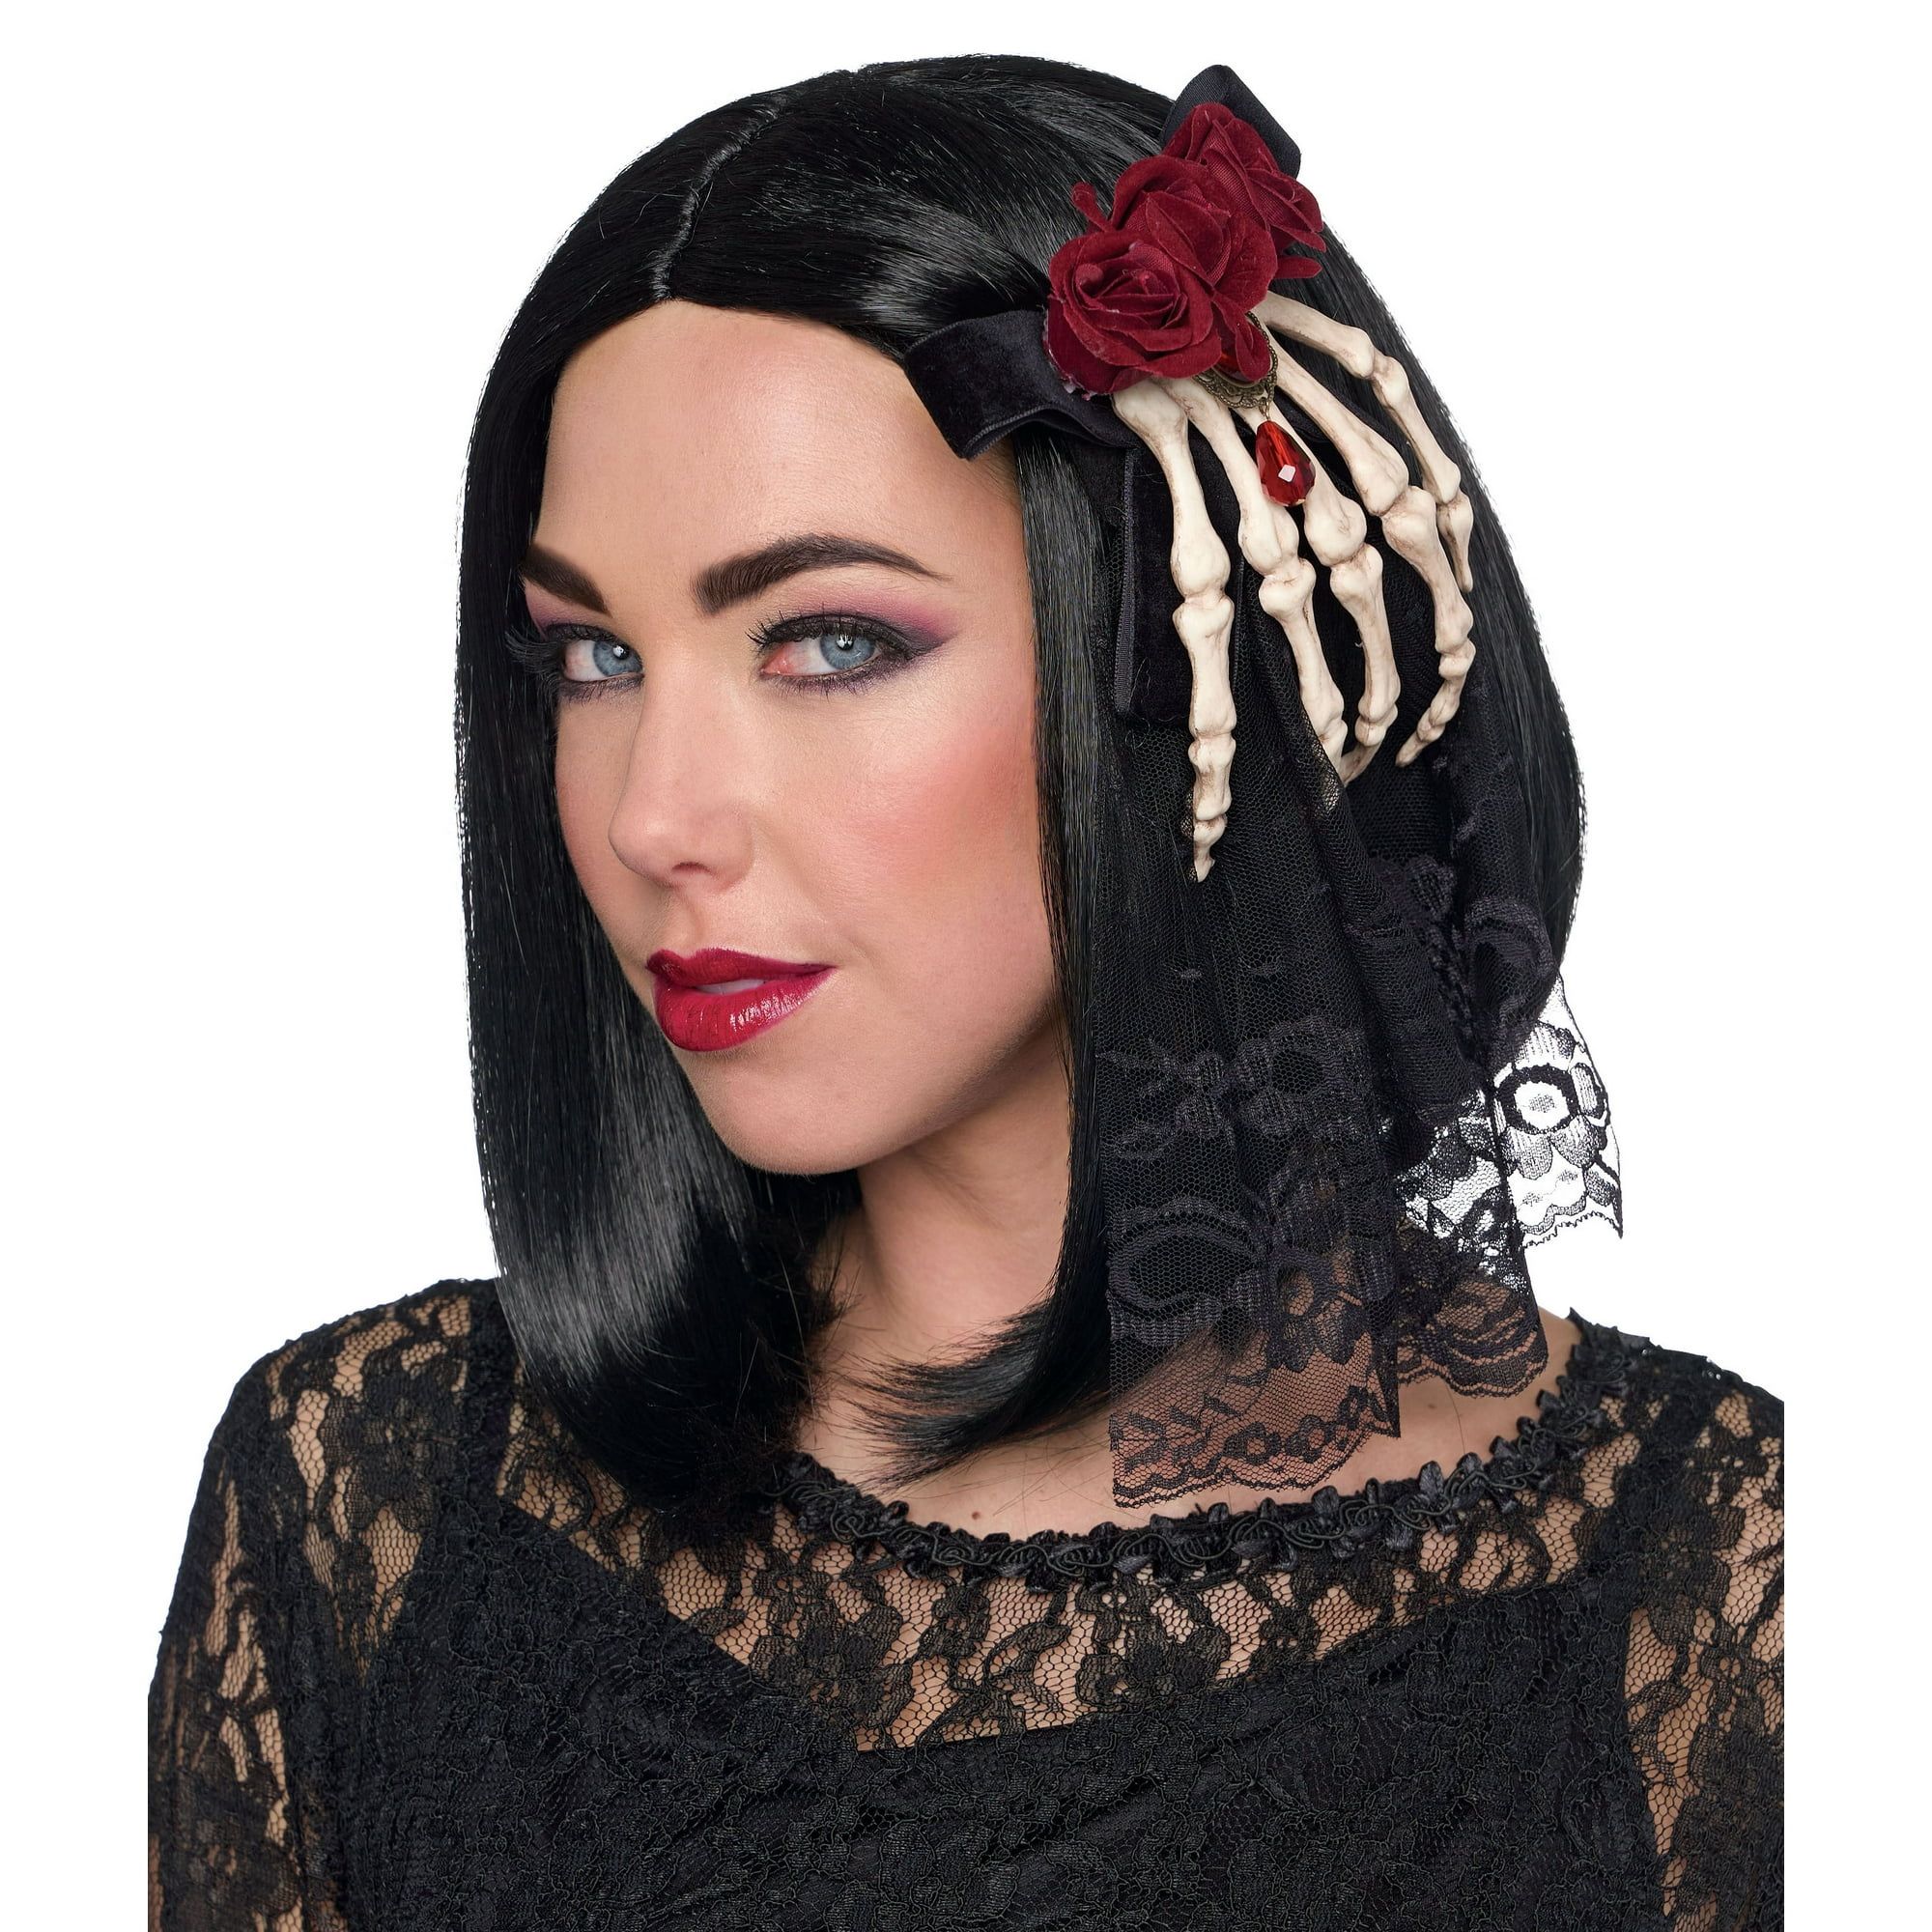 Halloween Gothic Skeleton Hand Hair Clip Costume Accessory for Adults by Way To Celebrate | Walmart (US)